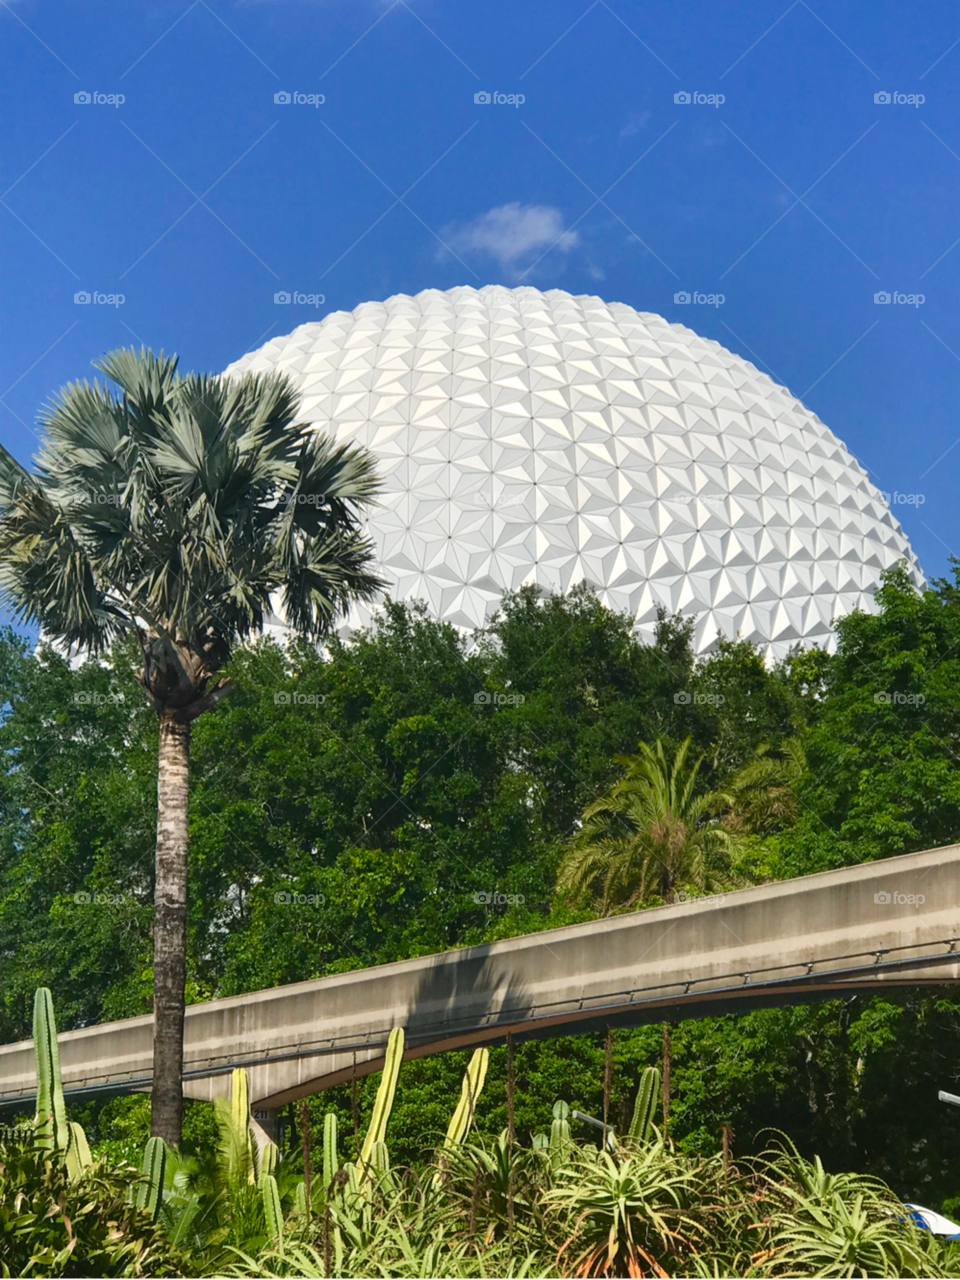 Epcot is amazing no matter where you are seeing it from.  What an amazing design!!